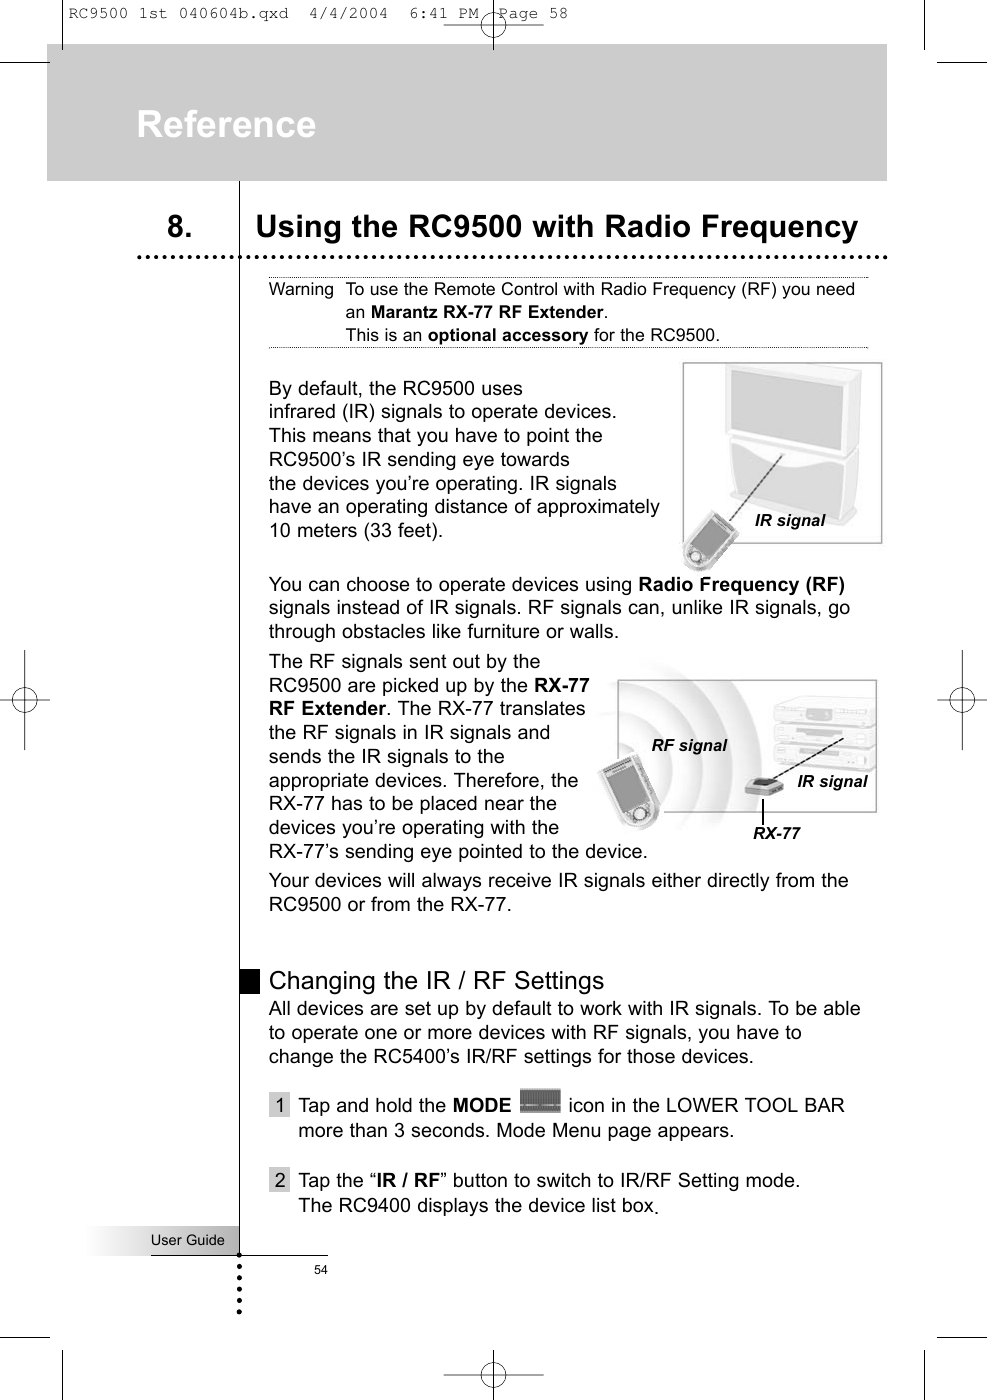 User Guide54Warning To use the Remote Control with Radio Frequency (RF) you needan Marantz RX-77 RF Extender. This is an optional accessory for the RC9500.By default, the RC9500 uses infrared (IR) signals to operate devices. This means that you have to point the RC9500’s IR sending eye towards the devices you’re operating. IR signals have an operating distance of approximately 10 meters (33 feet).You can choose to operate devices using Radio Frequency (RF)signals instead of IR signals. RF signals can, unlike IR signals, gothrough obstacles like furniture or walls.The RF signals sent out by theRC9500 are picked up by the RX-77RF Extender. The RX-77 translatesthe RF signals in IR signals andsends the IR signals to theappropriate devices. Therefore, theRX-77 has to be placed near thedevices you’re operating with theRX-77’s sending eye pointed to the device. Your devices will always receive IR signals either directly from theRC9500 or from the RX-77.Changing the IR / RF SettingsAll devices are set up by default to work with IR signals. To be ableto operate one or more devices with RF signals, you have tochange the RC5400’s IR/RF settings for those devices.1  Tap and hold the MODE icon in the LOWER TOOL BARmore than 3 seconds. Mode Menu page appears.2 Tap the “IR / RF” button to switch to IR/RF Setting mode.The RC9400 displays the device list box.Reference8. Using the RC9500 with Radio Frequency IR signalIR signalRF signalRX-77RC9500 1st 040604b.qxd  4/4/2004  6:41 PM  Page 58